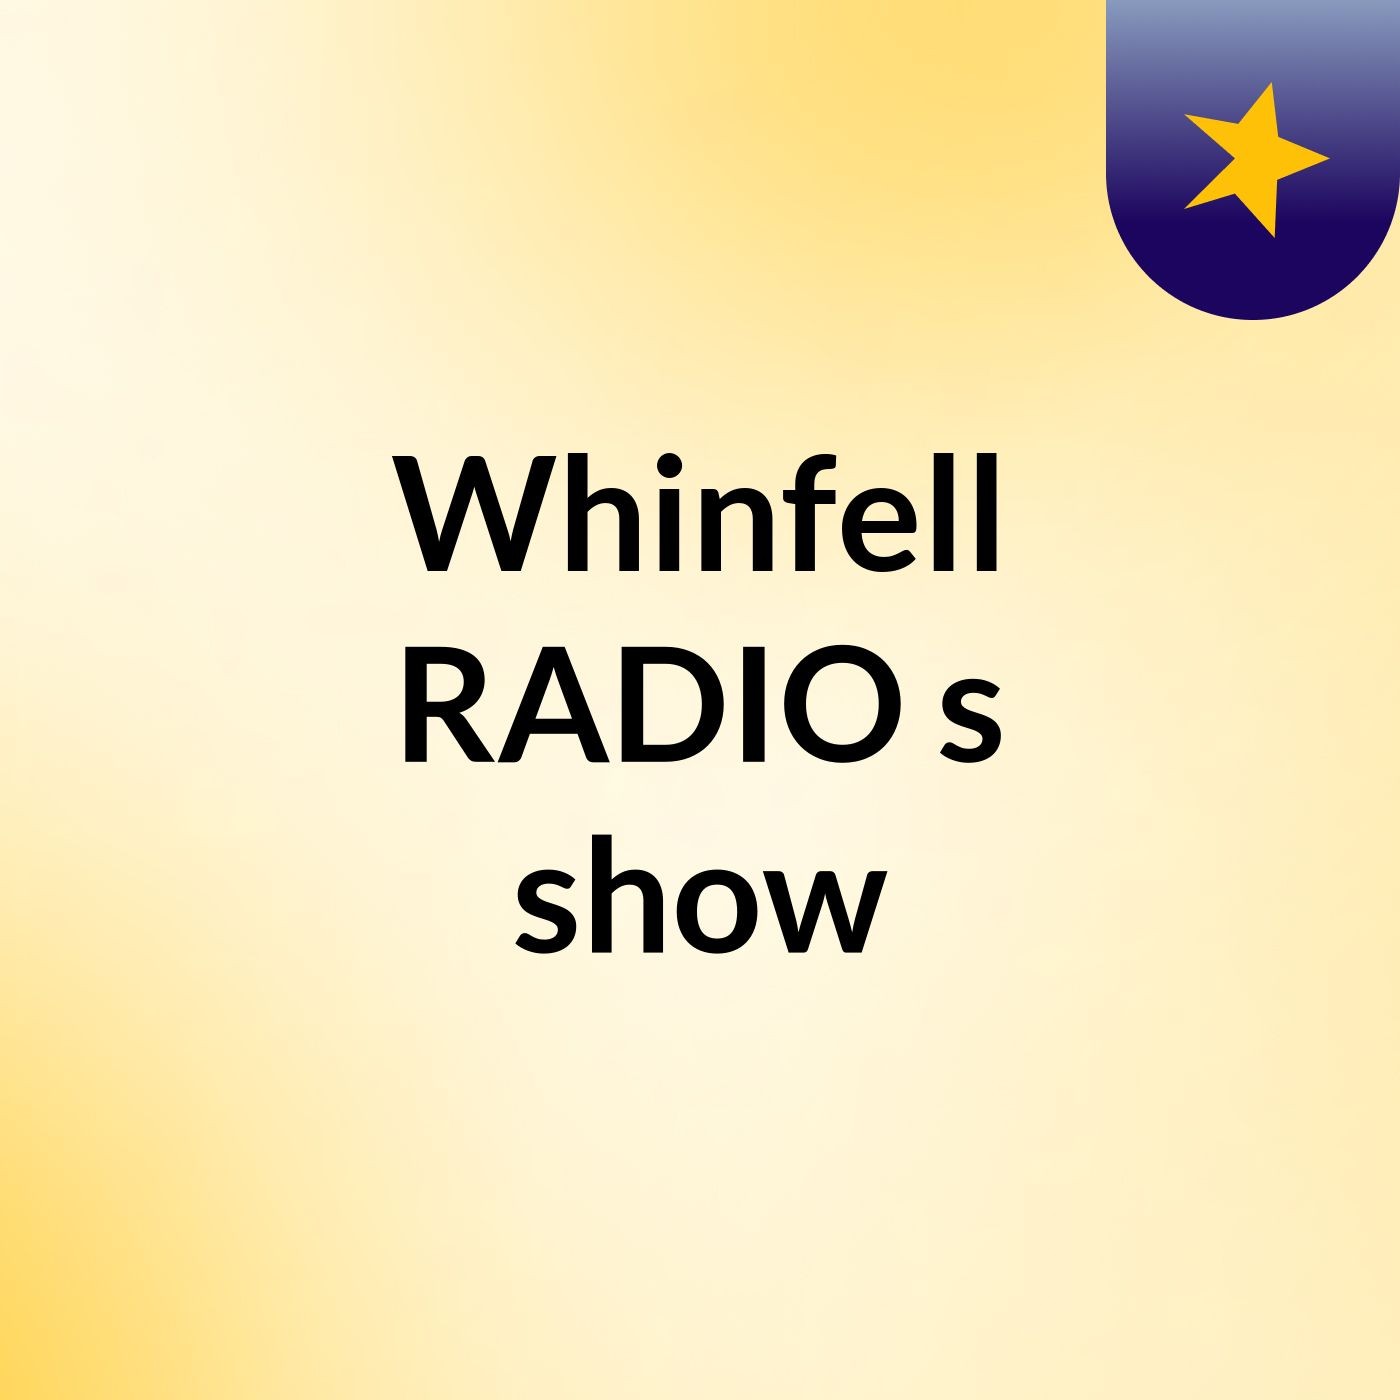 Whinfell RADIO PT1